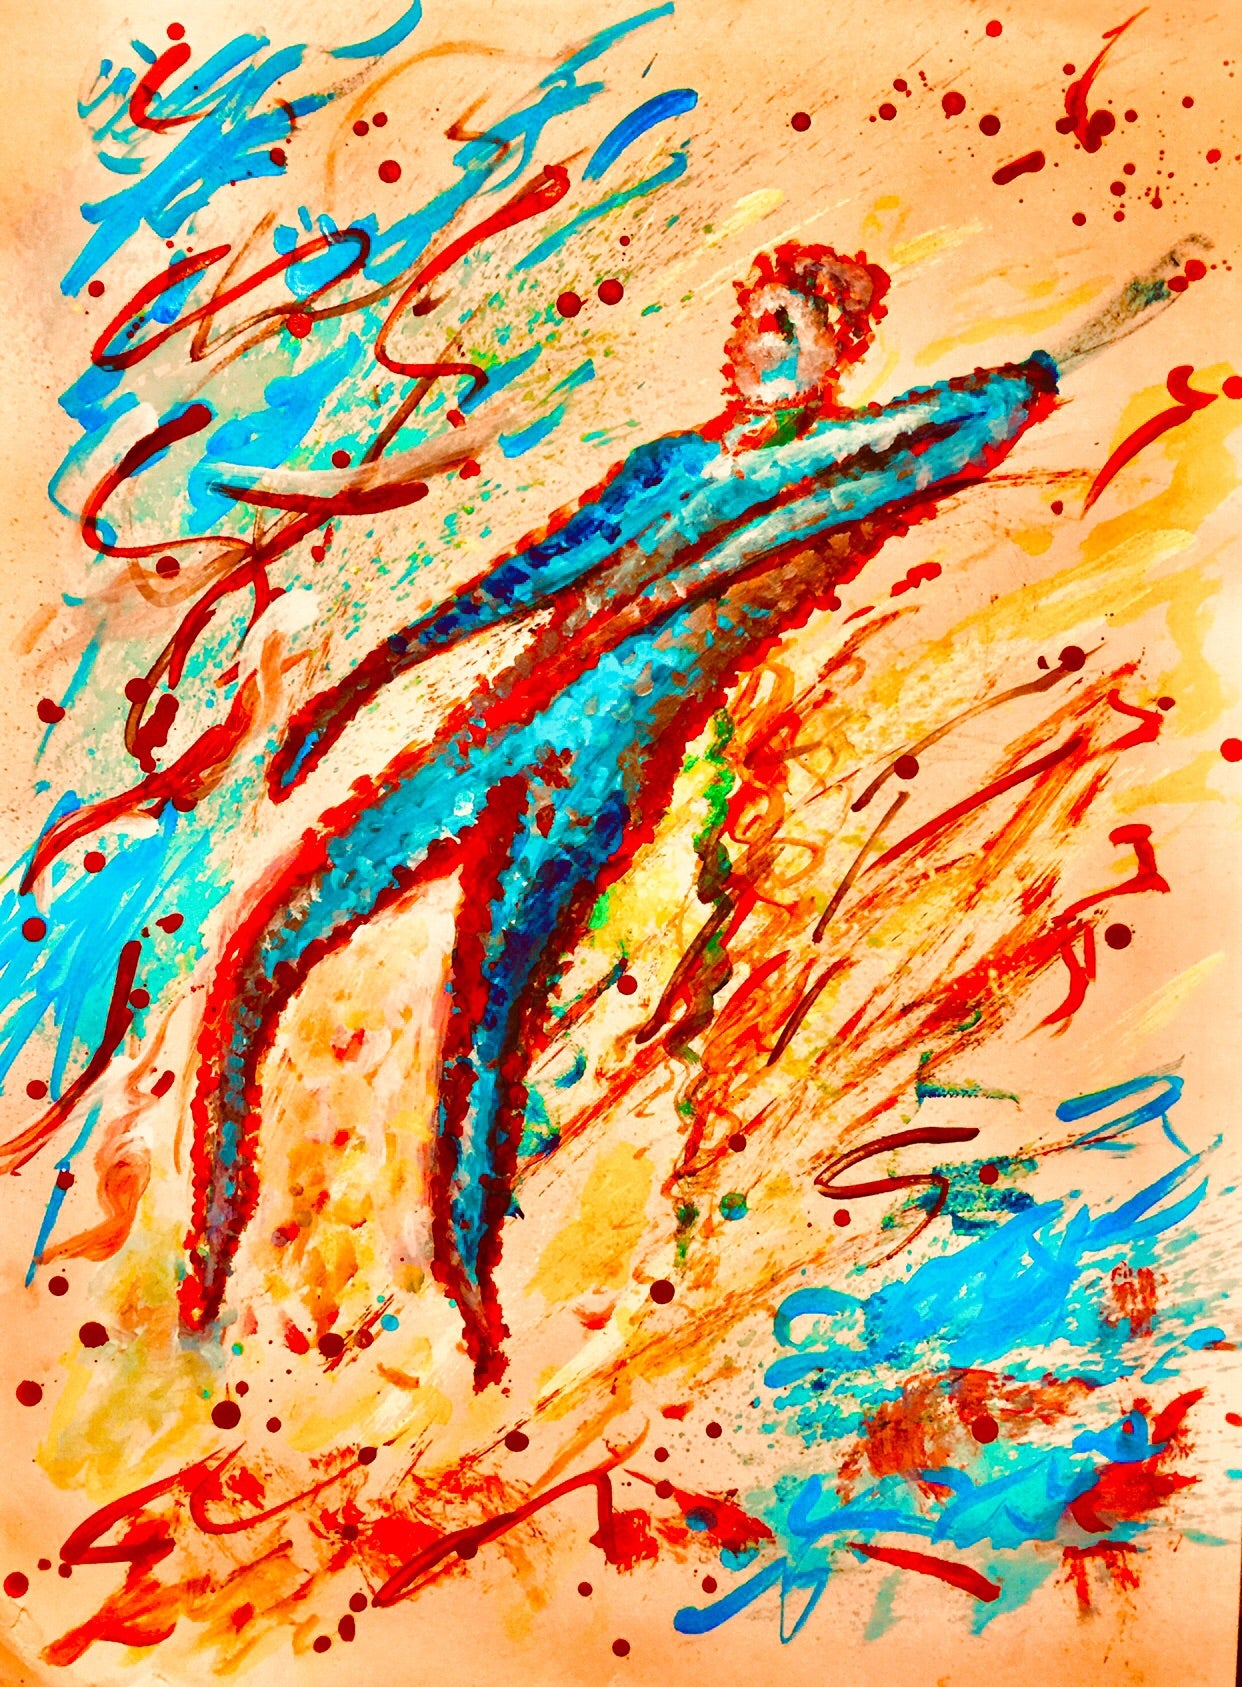 blaze_of_glory] - Sonarta.comShake it to the Right and then shake it to the left ❤️😃. It is a joyful and happy painting characterized by its colors and gestures. It moves with you as you move around the room.  This painting is an Original Acrylic on Paper by Shahla Rahimi  Reynolds. Shake Your Body Baby, Shake It is 28 1/2” H X 20 1/4” W..